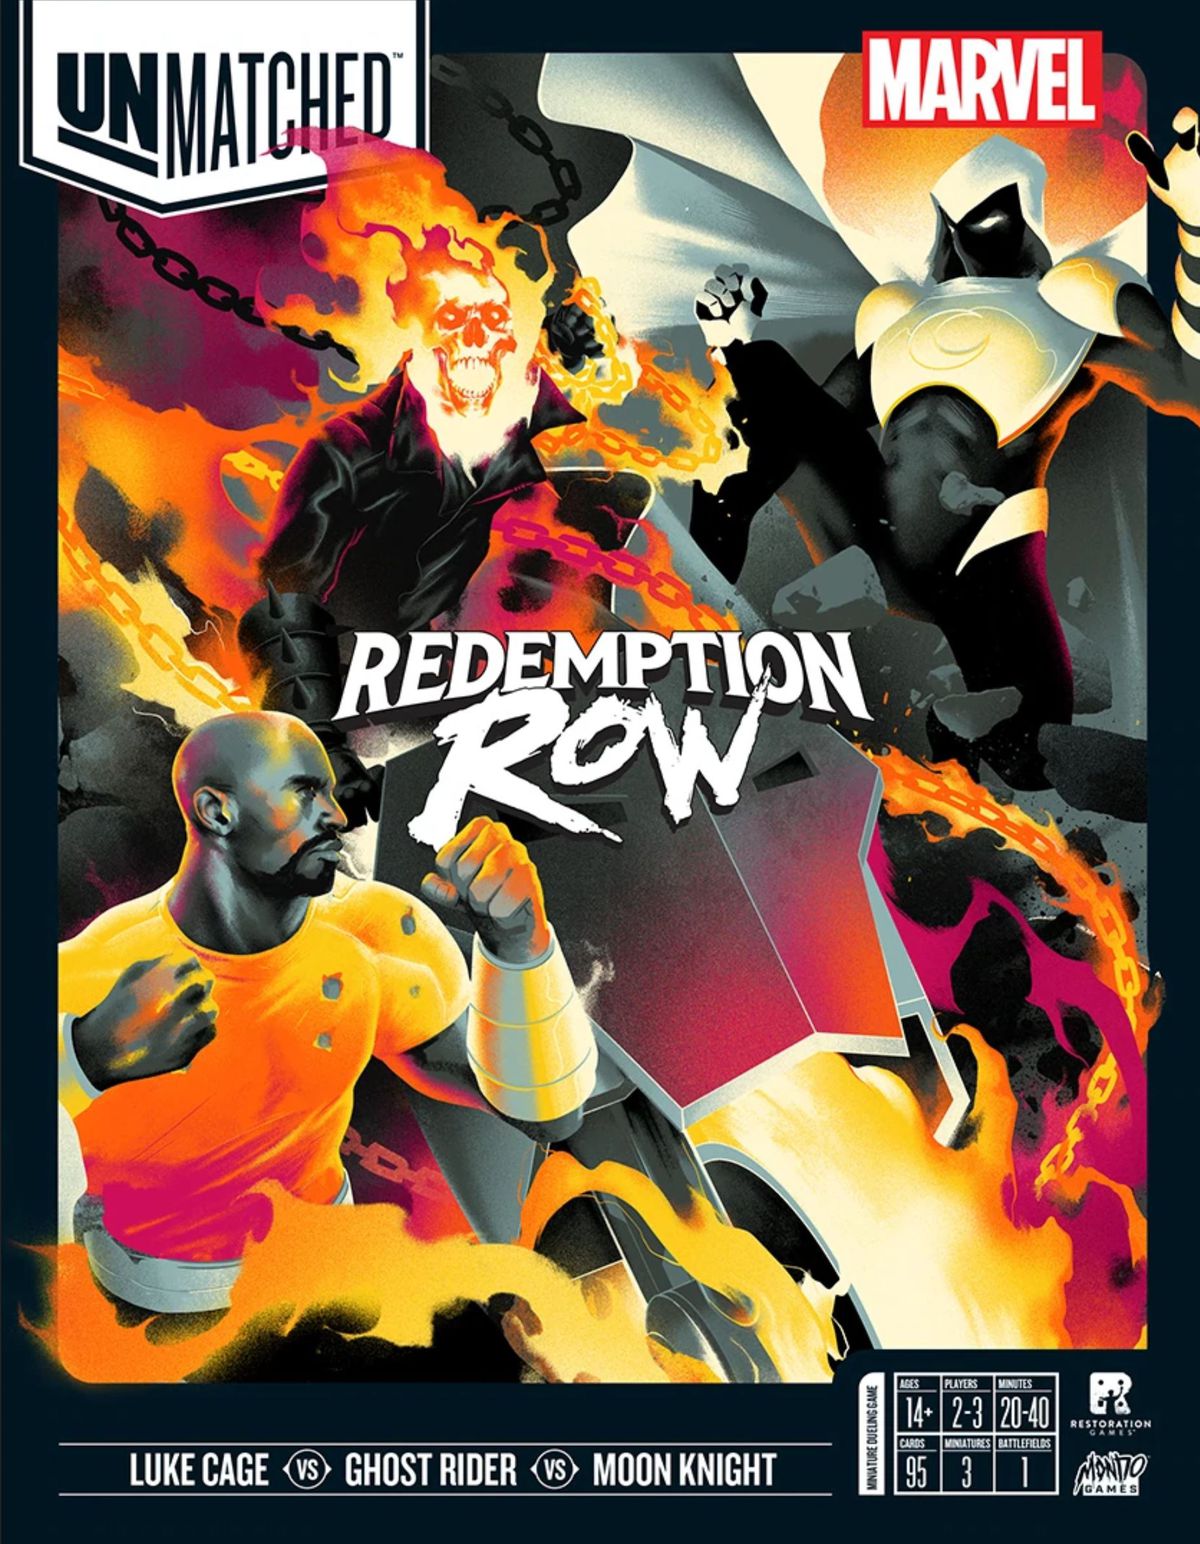 A mock-up of a cover of Unmatched: Redemption Row.